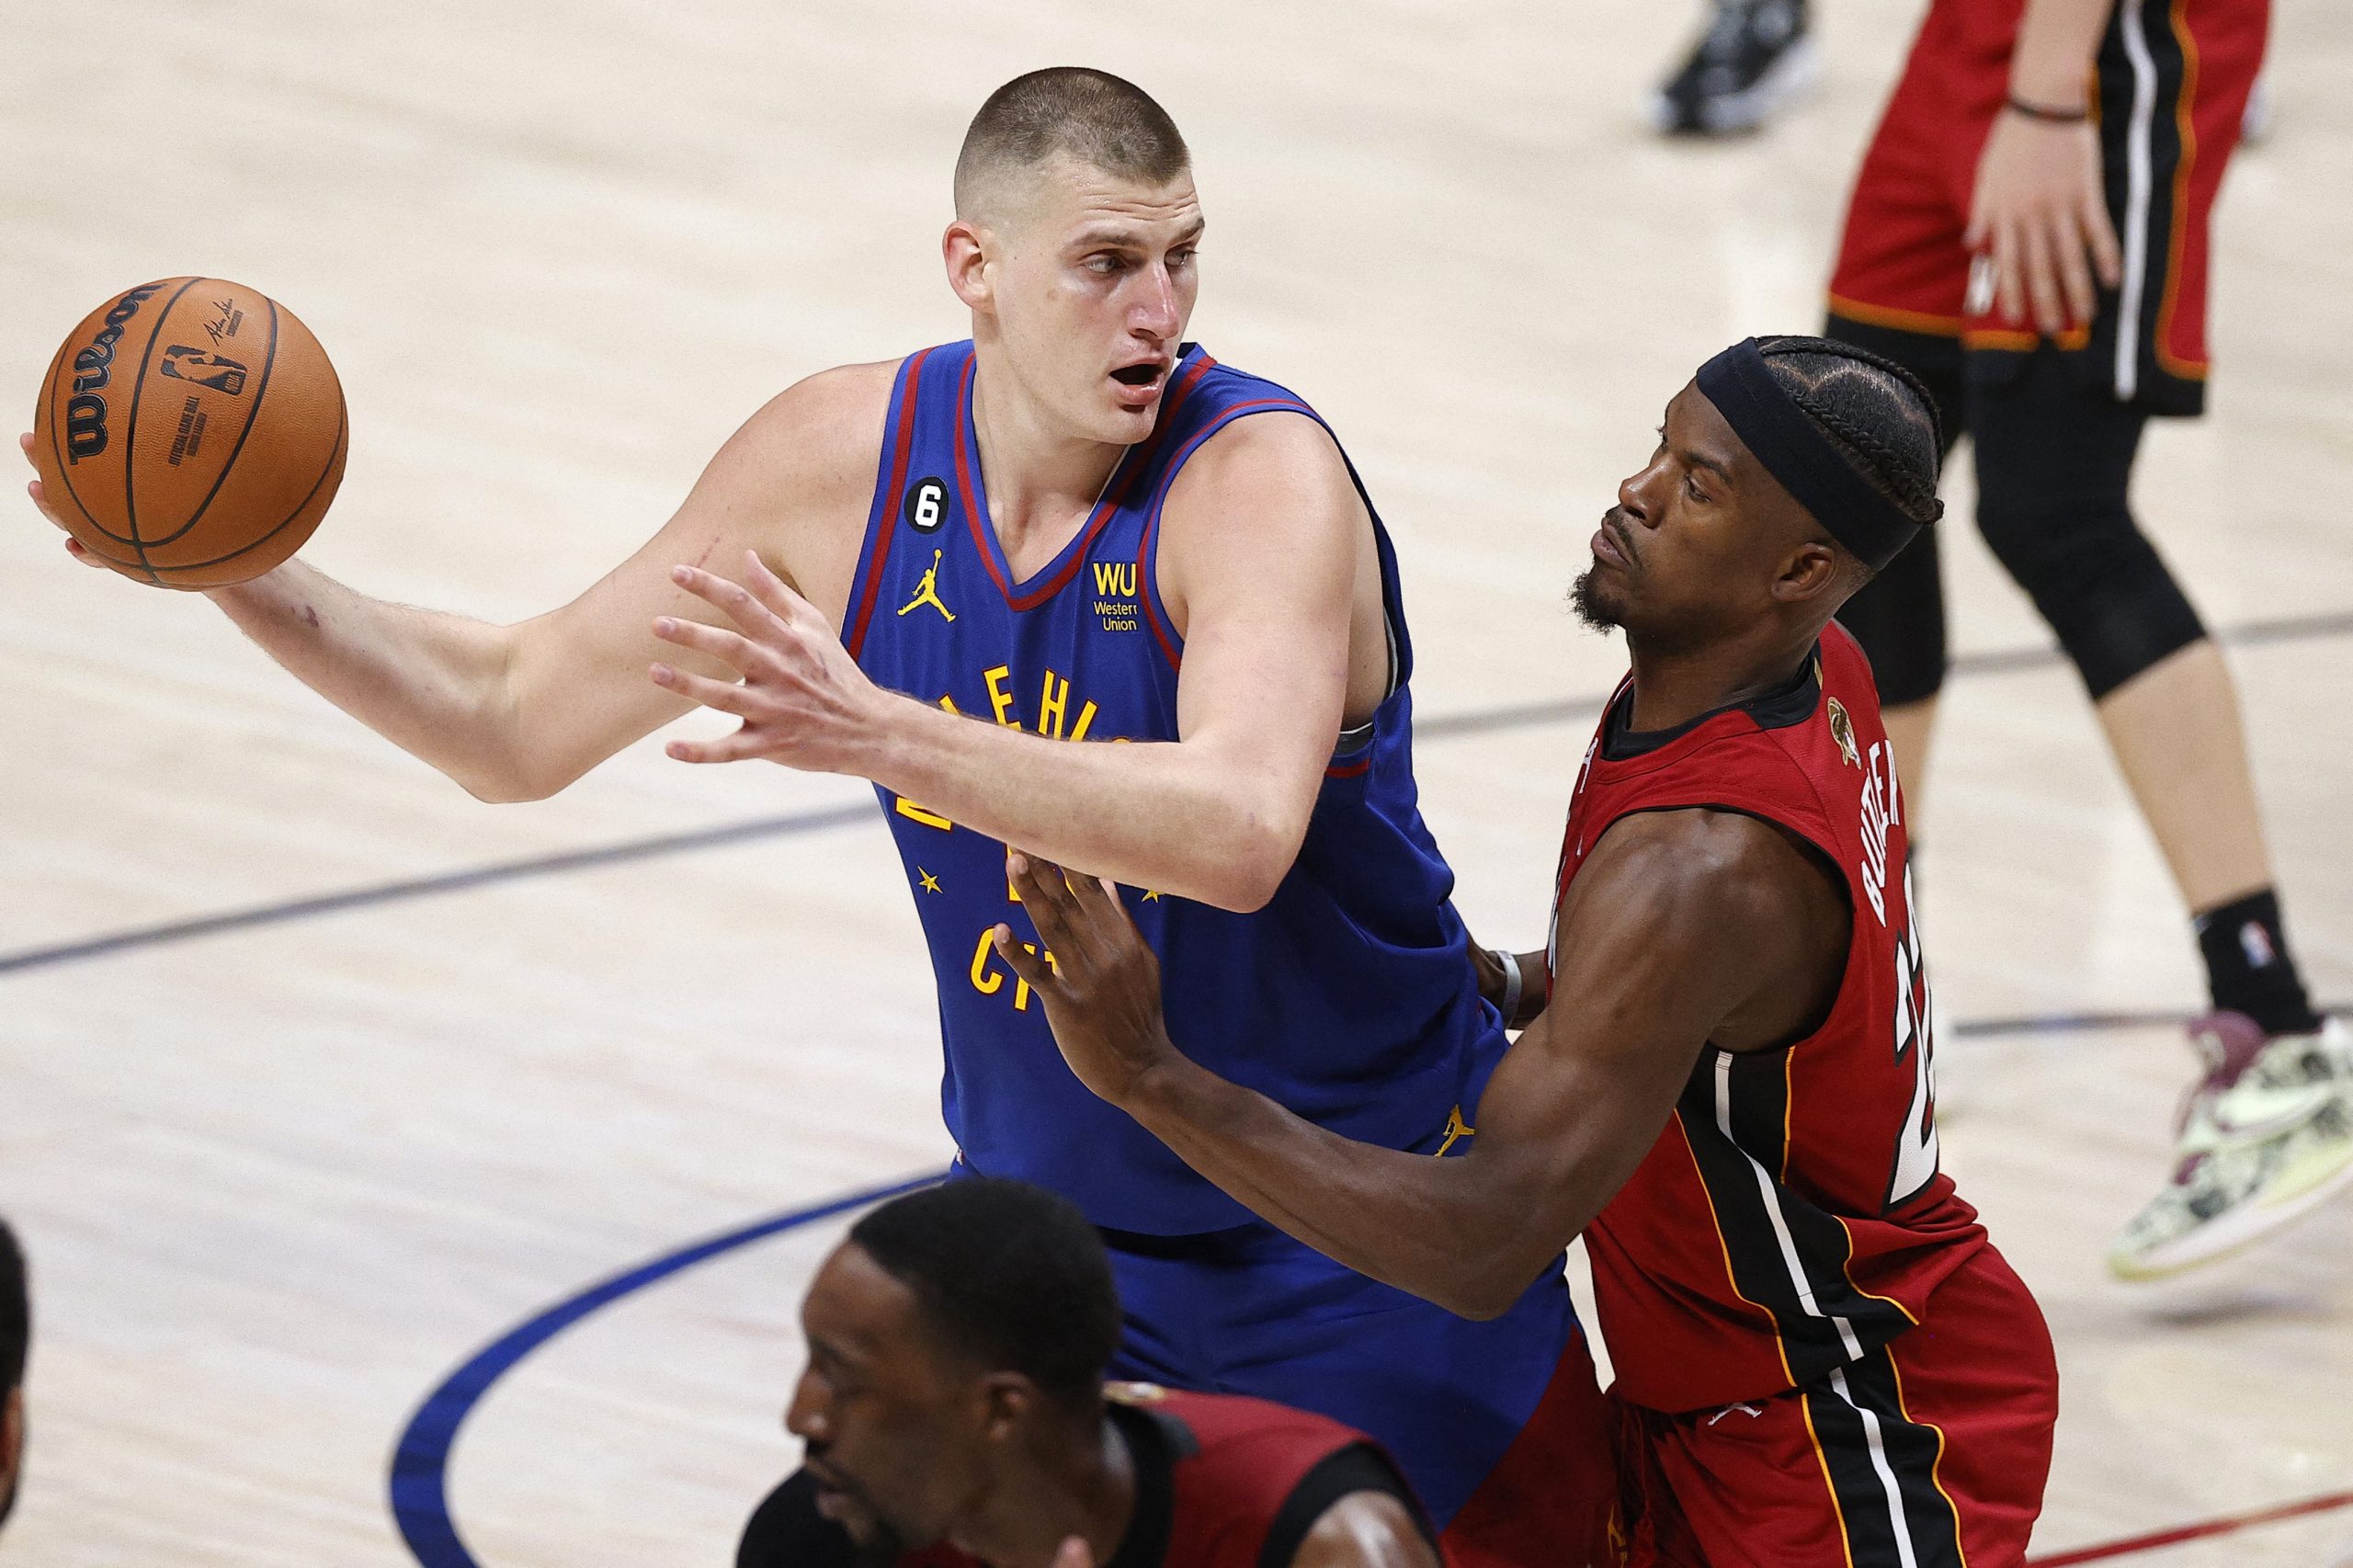 Jun 1, 2023; Denver, CO, USA; Denver Nuggets center Nikola Jokic (15) controls the ball while defended by Miami Heat forward Jimmy Butler (22) during the second quarter in game one of the 2023 NBA Finals at Ball Arena. Mandatory Credit: Isaiah J. Downing-USA TODAY Sports Photo: Isaiah J. Downing/REUTERS